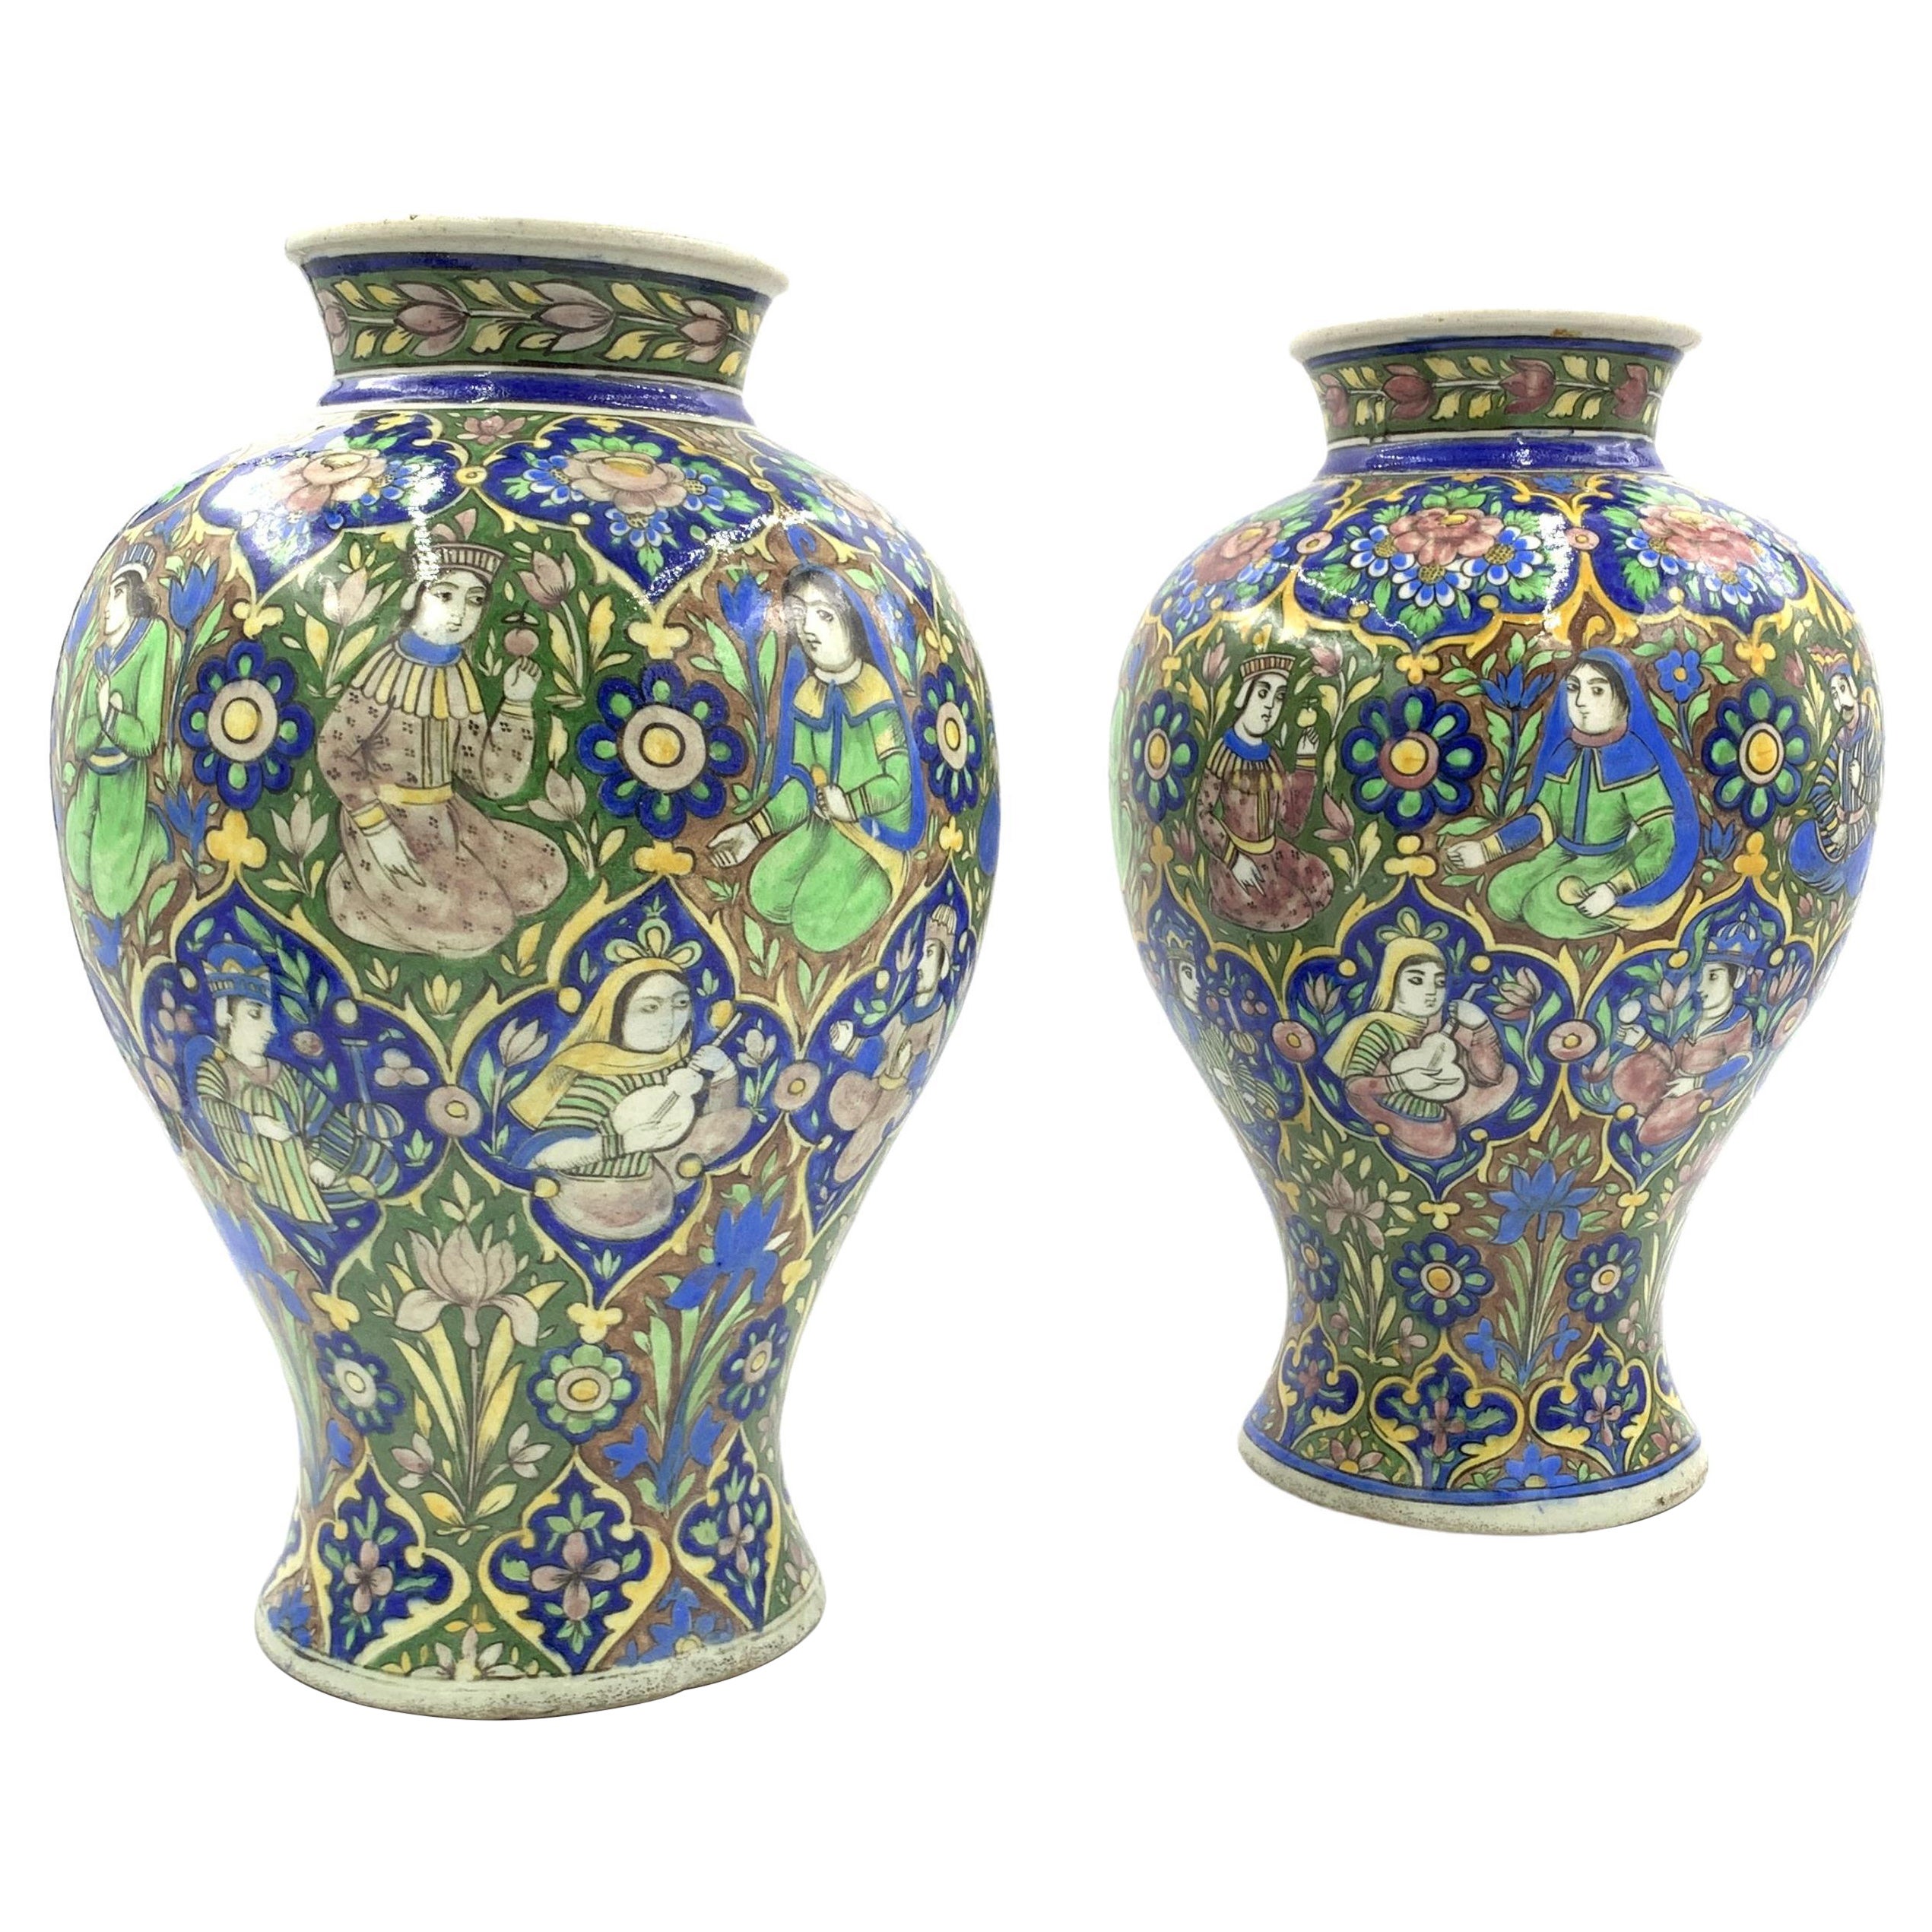 Pair of Qajar Vases with Floral Design, 19th Century